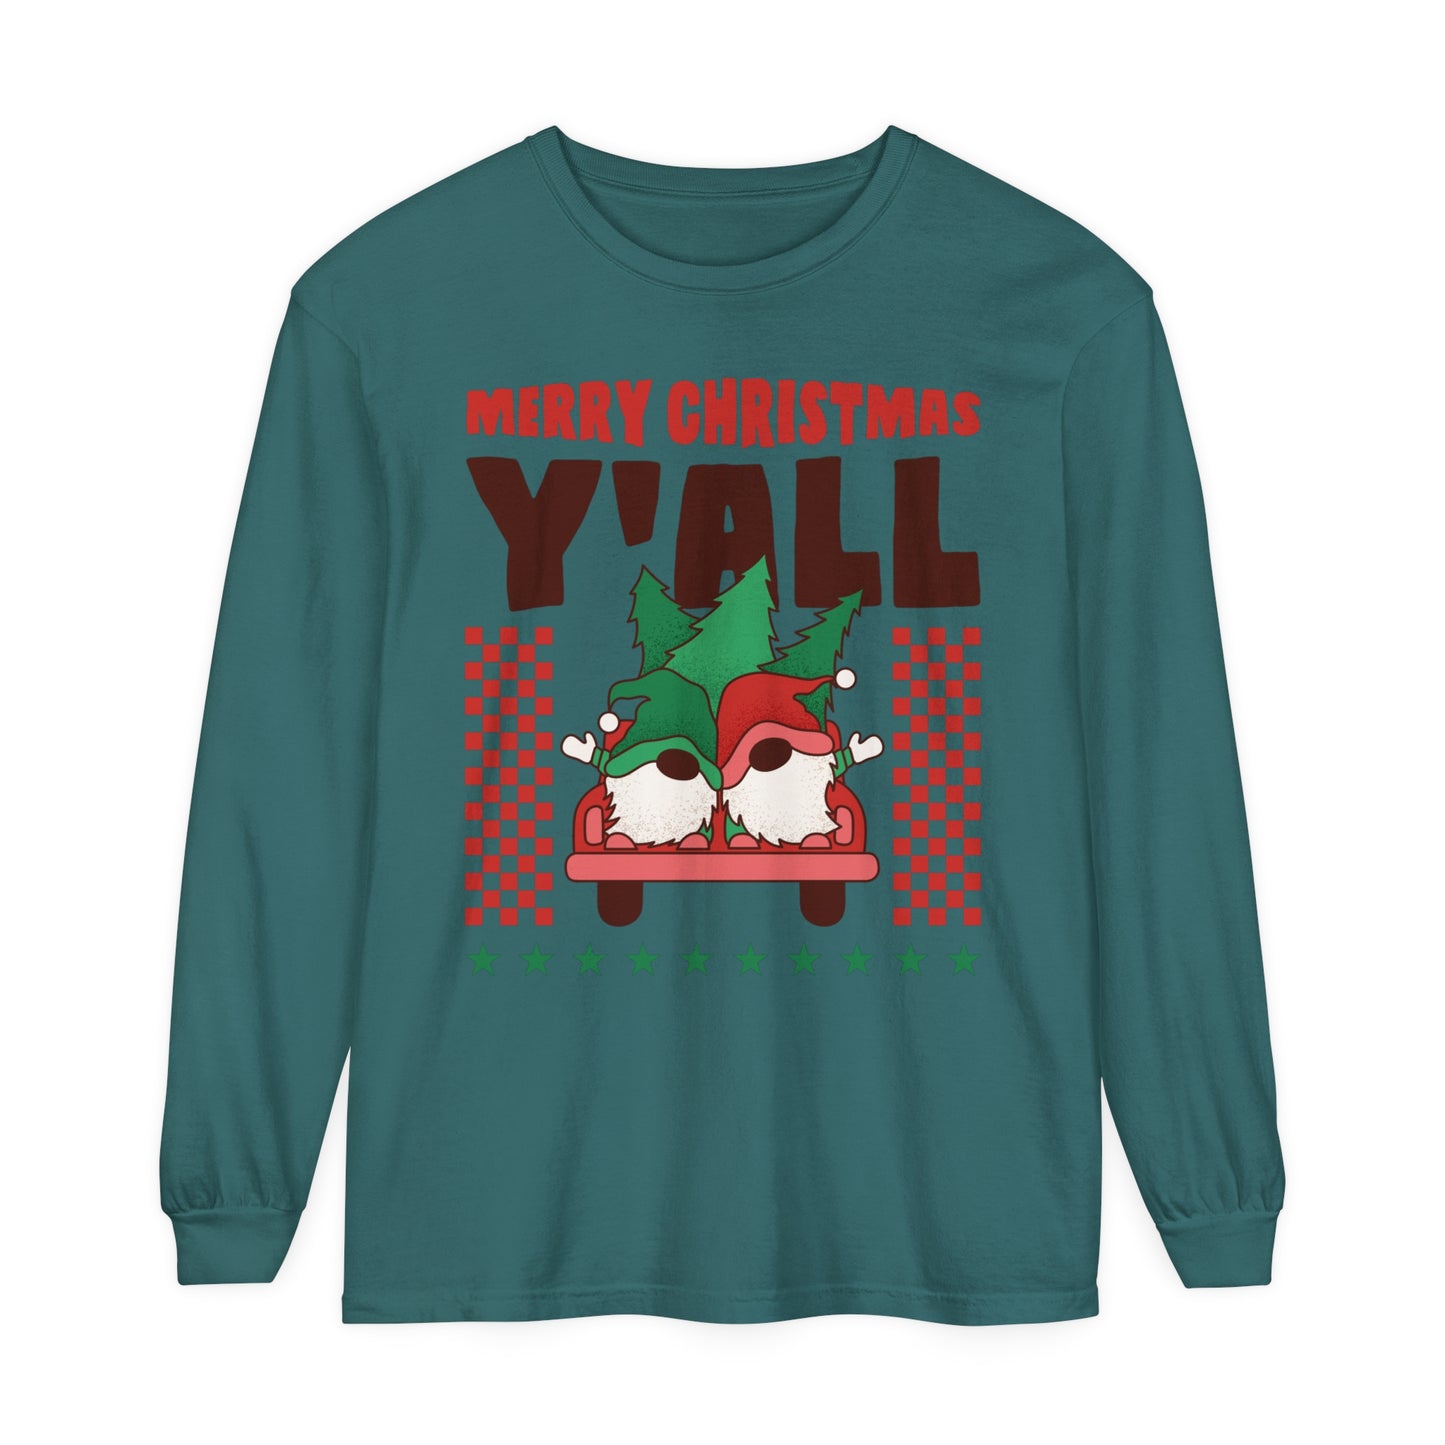 Merry Christmas Y'all Women's Christmas Holiday Loose Long Sleeve T-Shirt